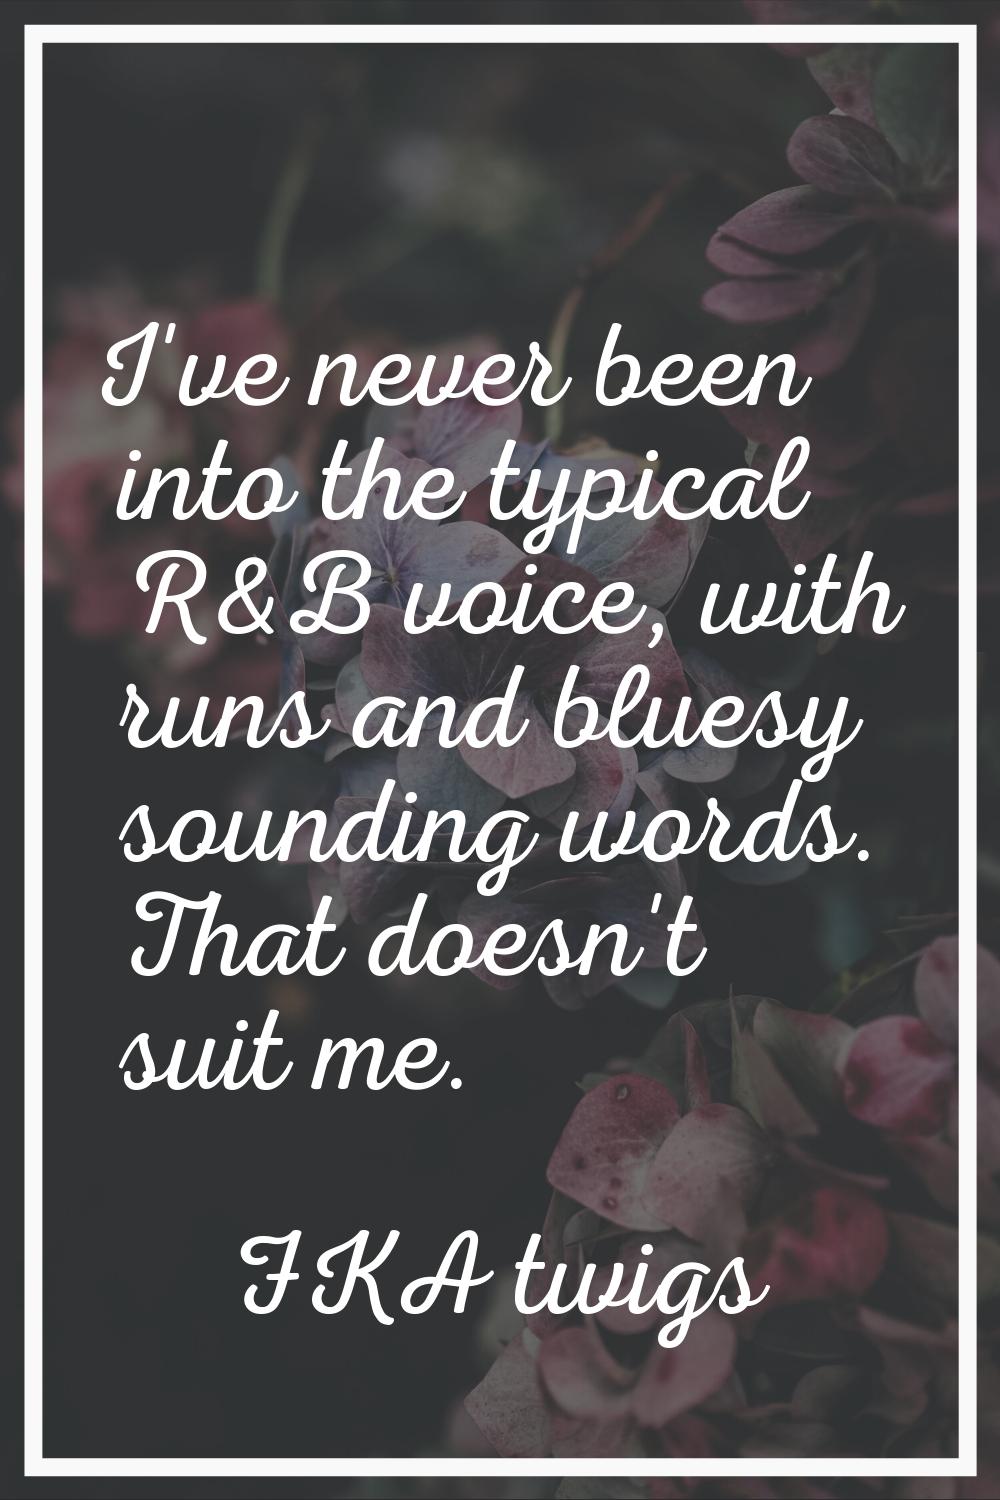 I've never been into the typical R&B voice, with runs and bluesy sounding words. That doesn't suit 